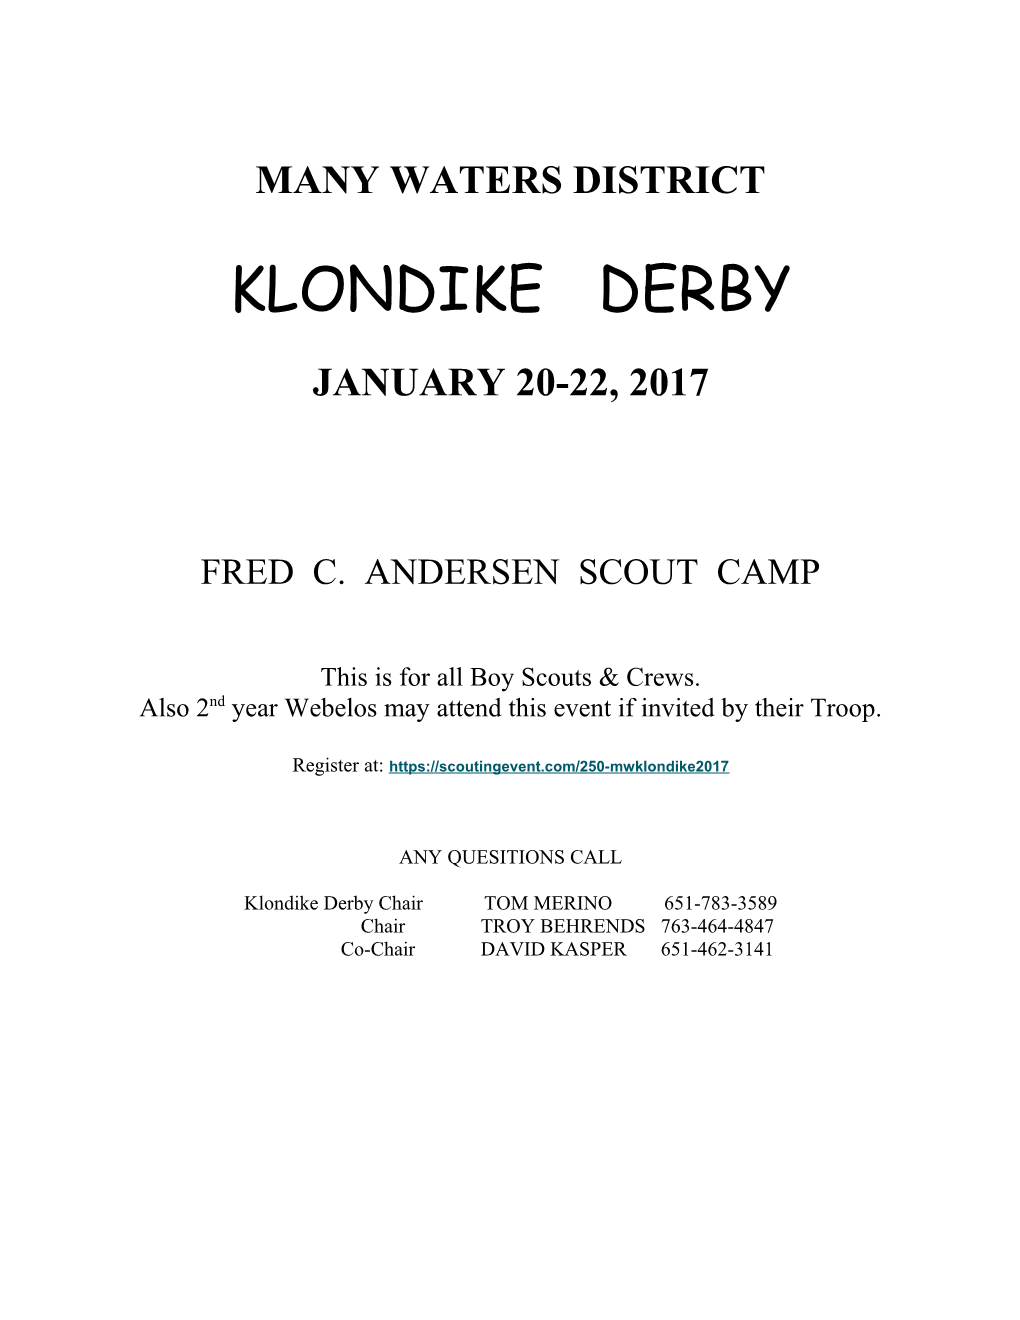 Many Waters District Northern Star Council, Bsa